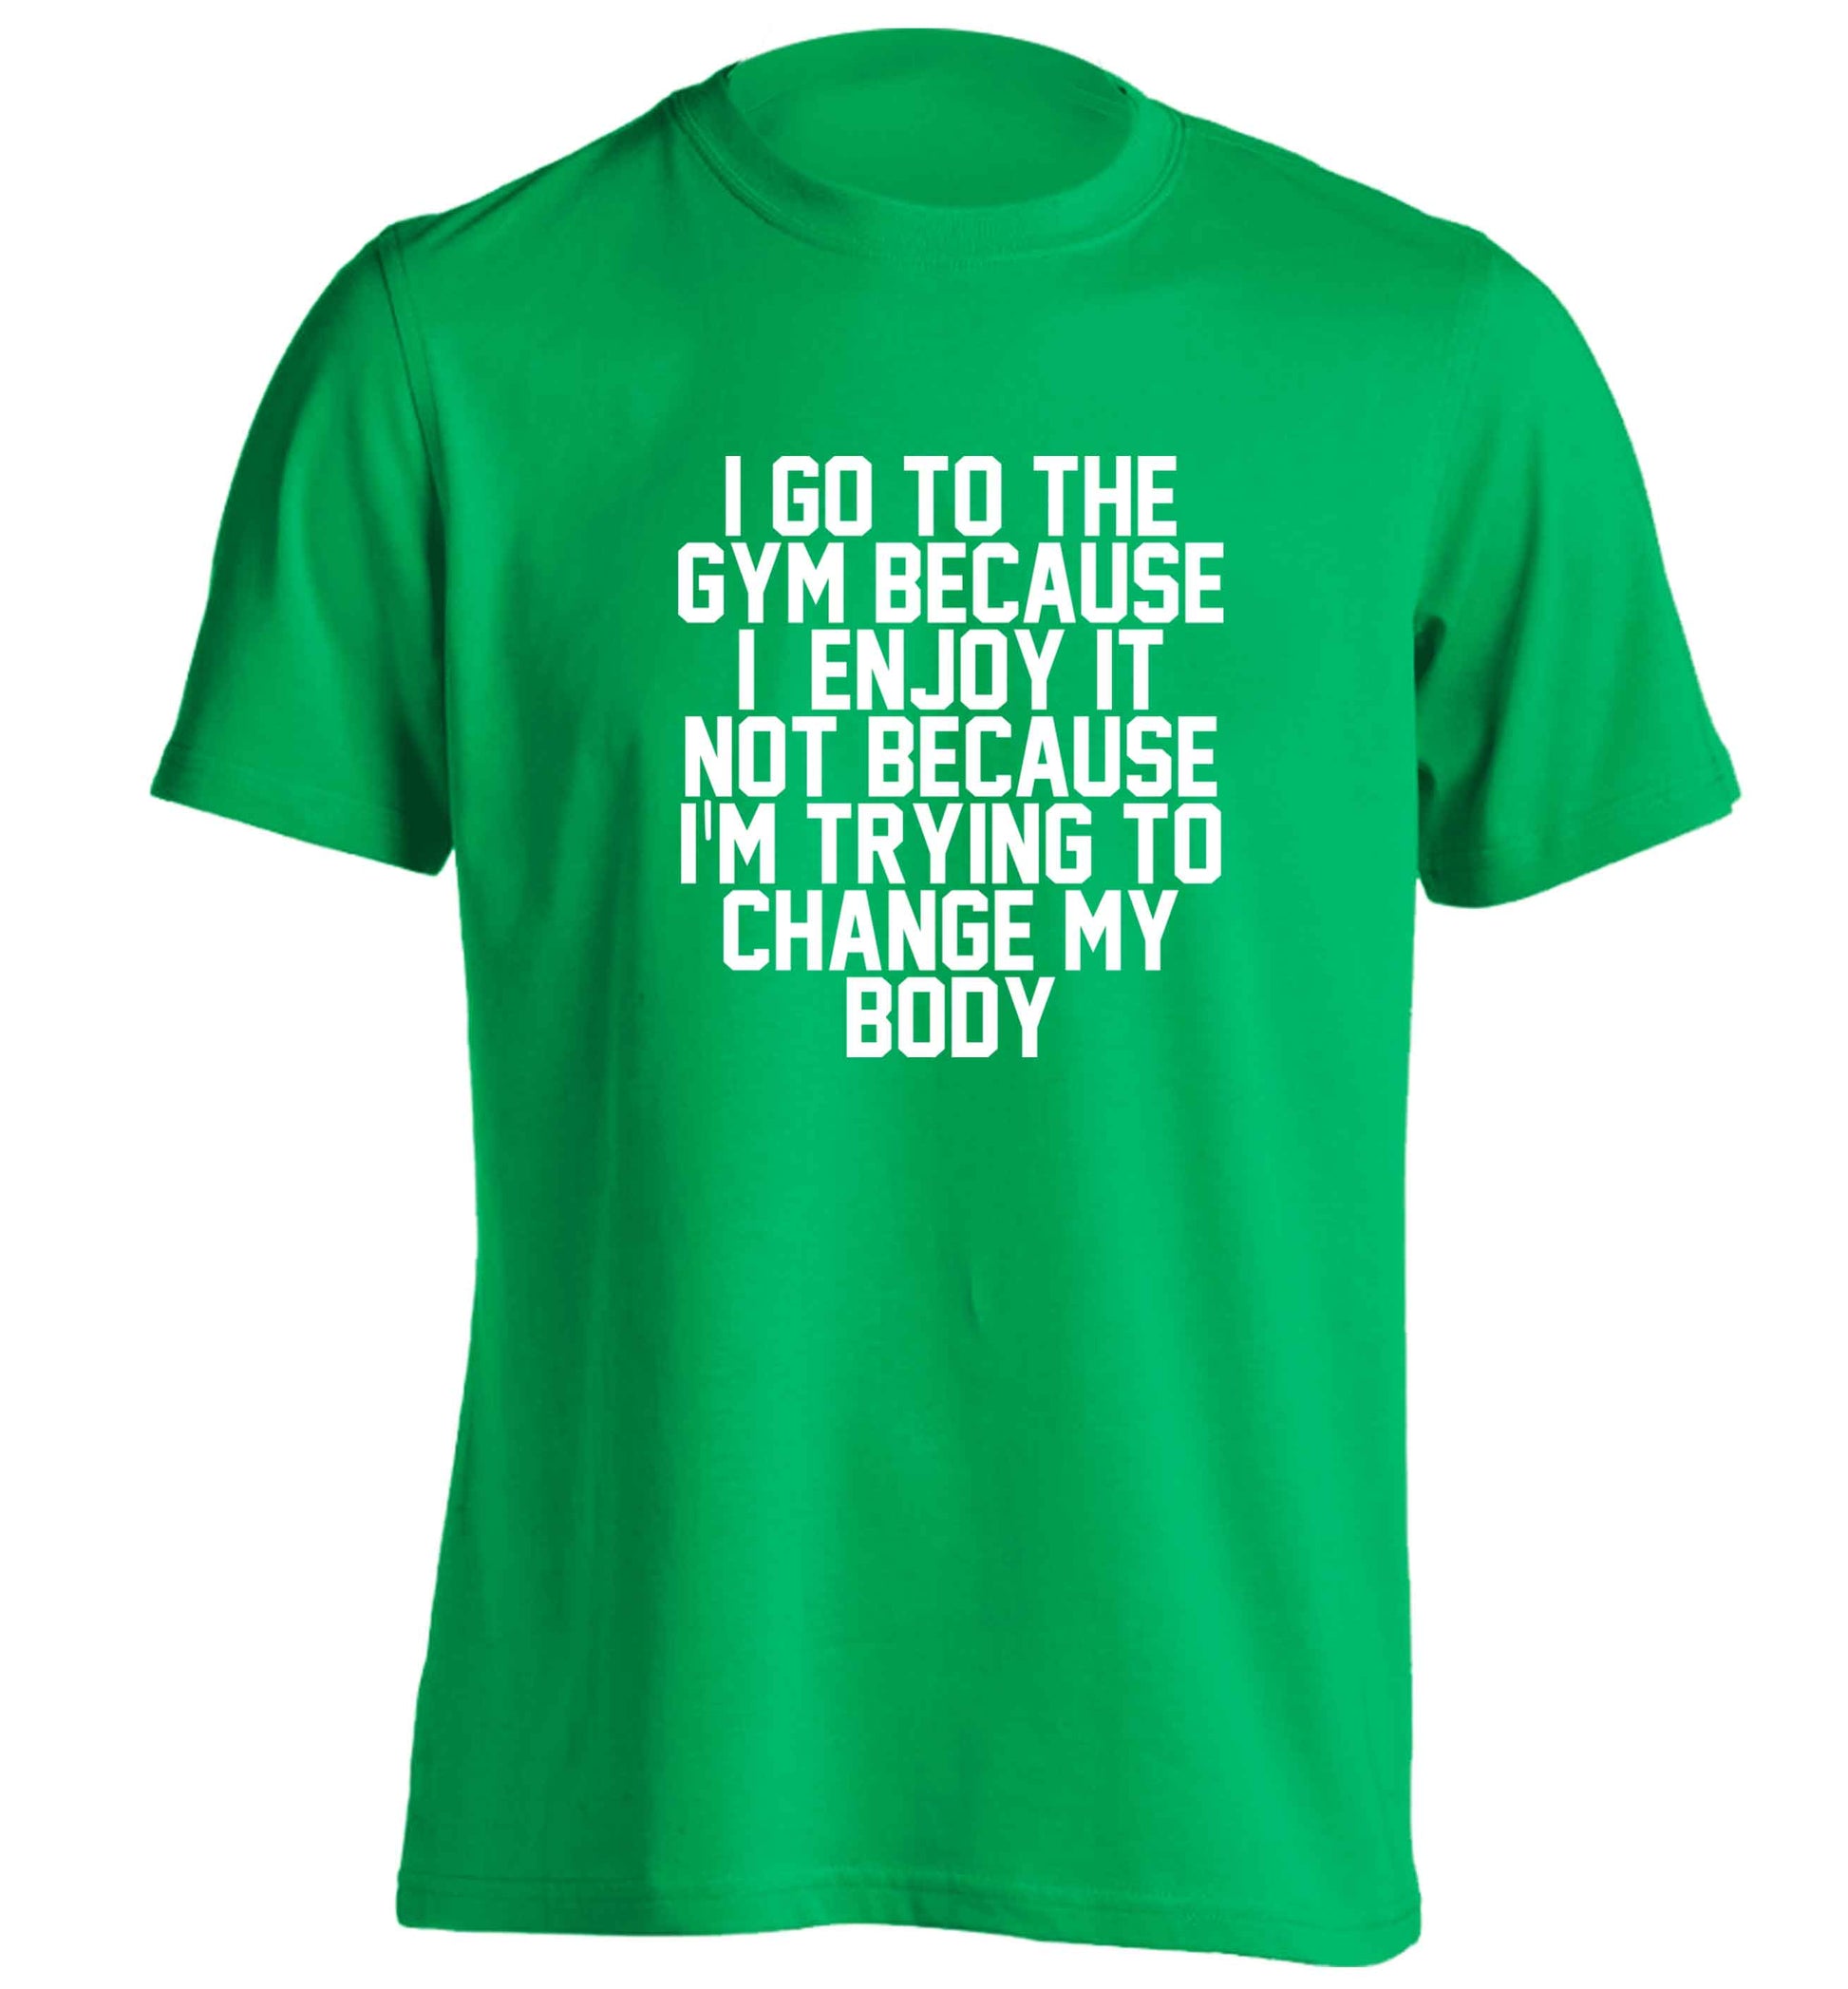 I go to the gym because I enjoy it not because I'm trying to change my body adults unisex green Tshirt 2XL